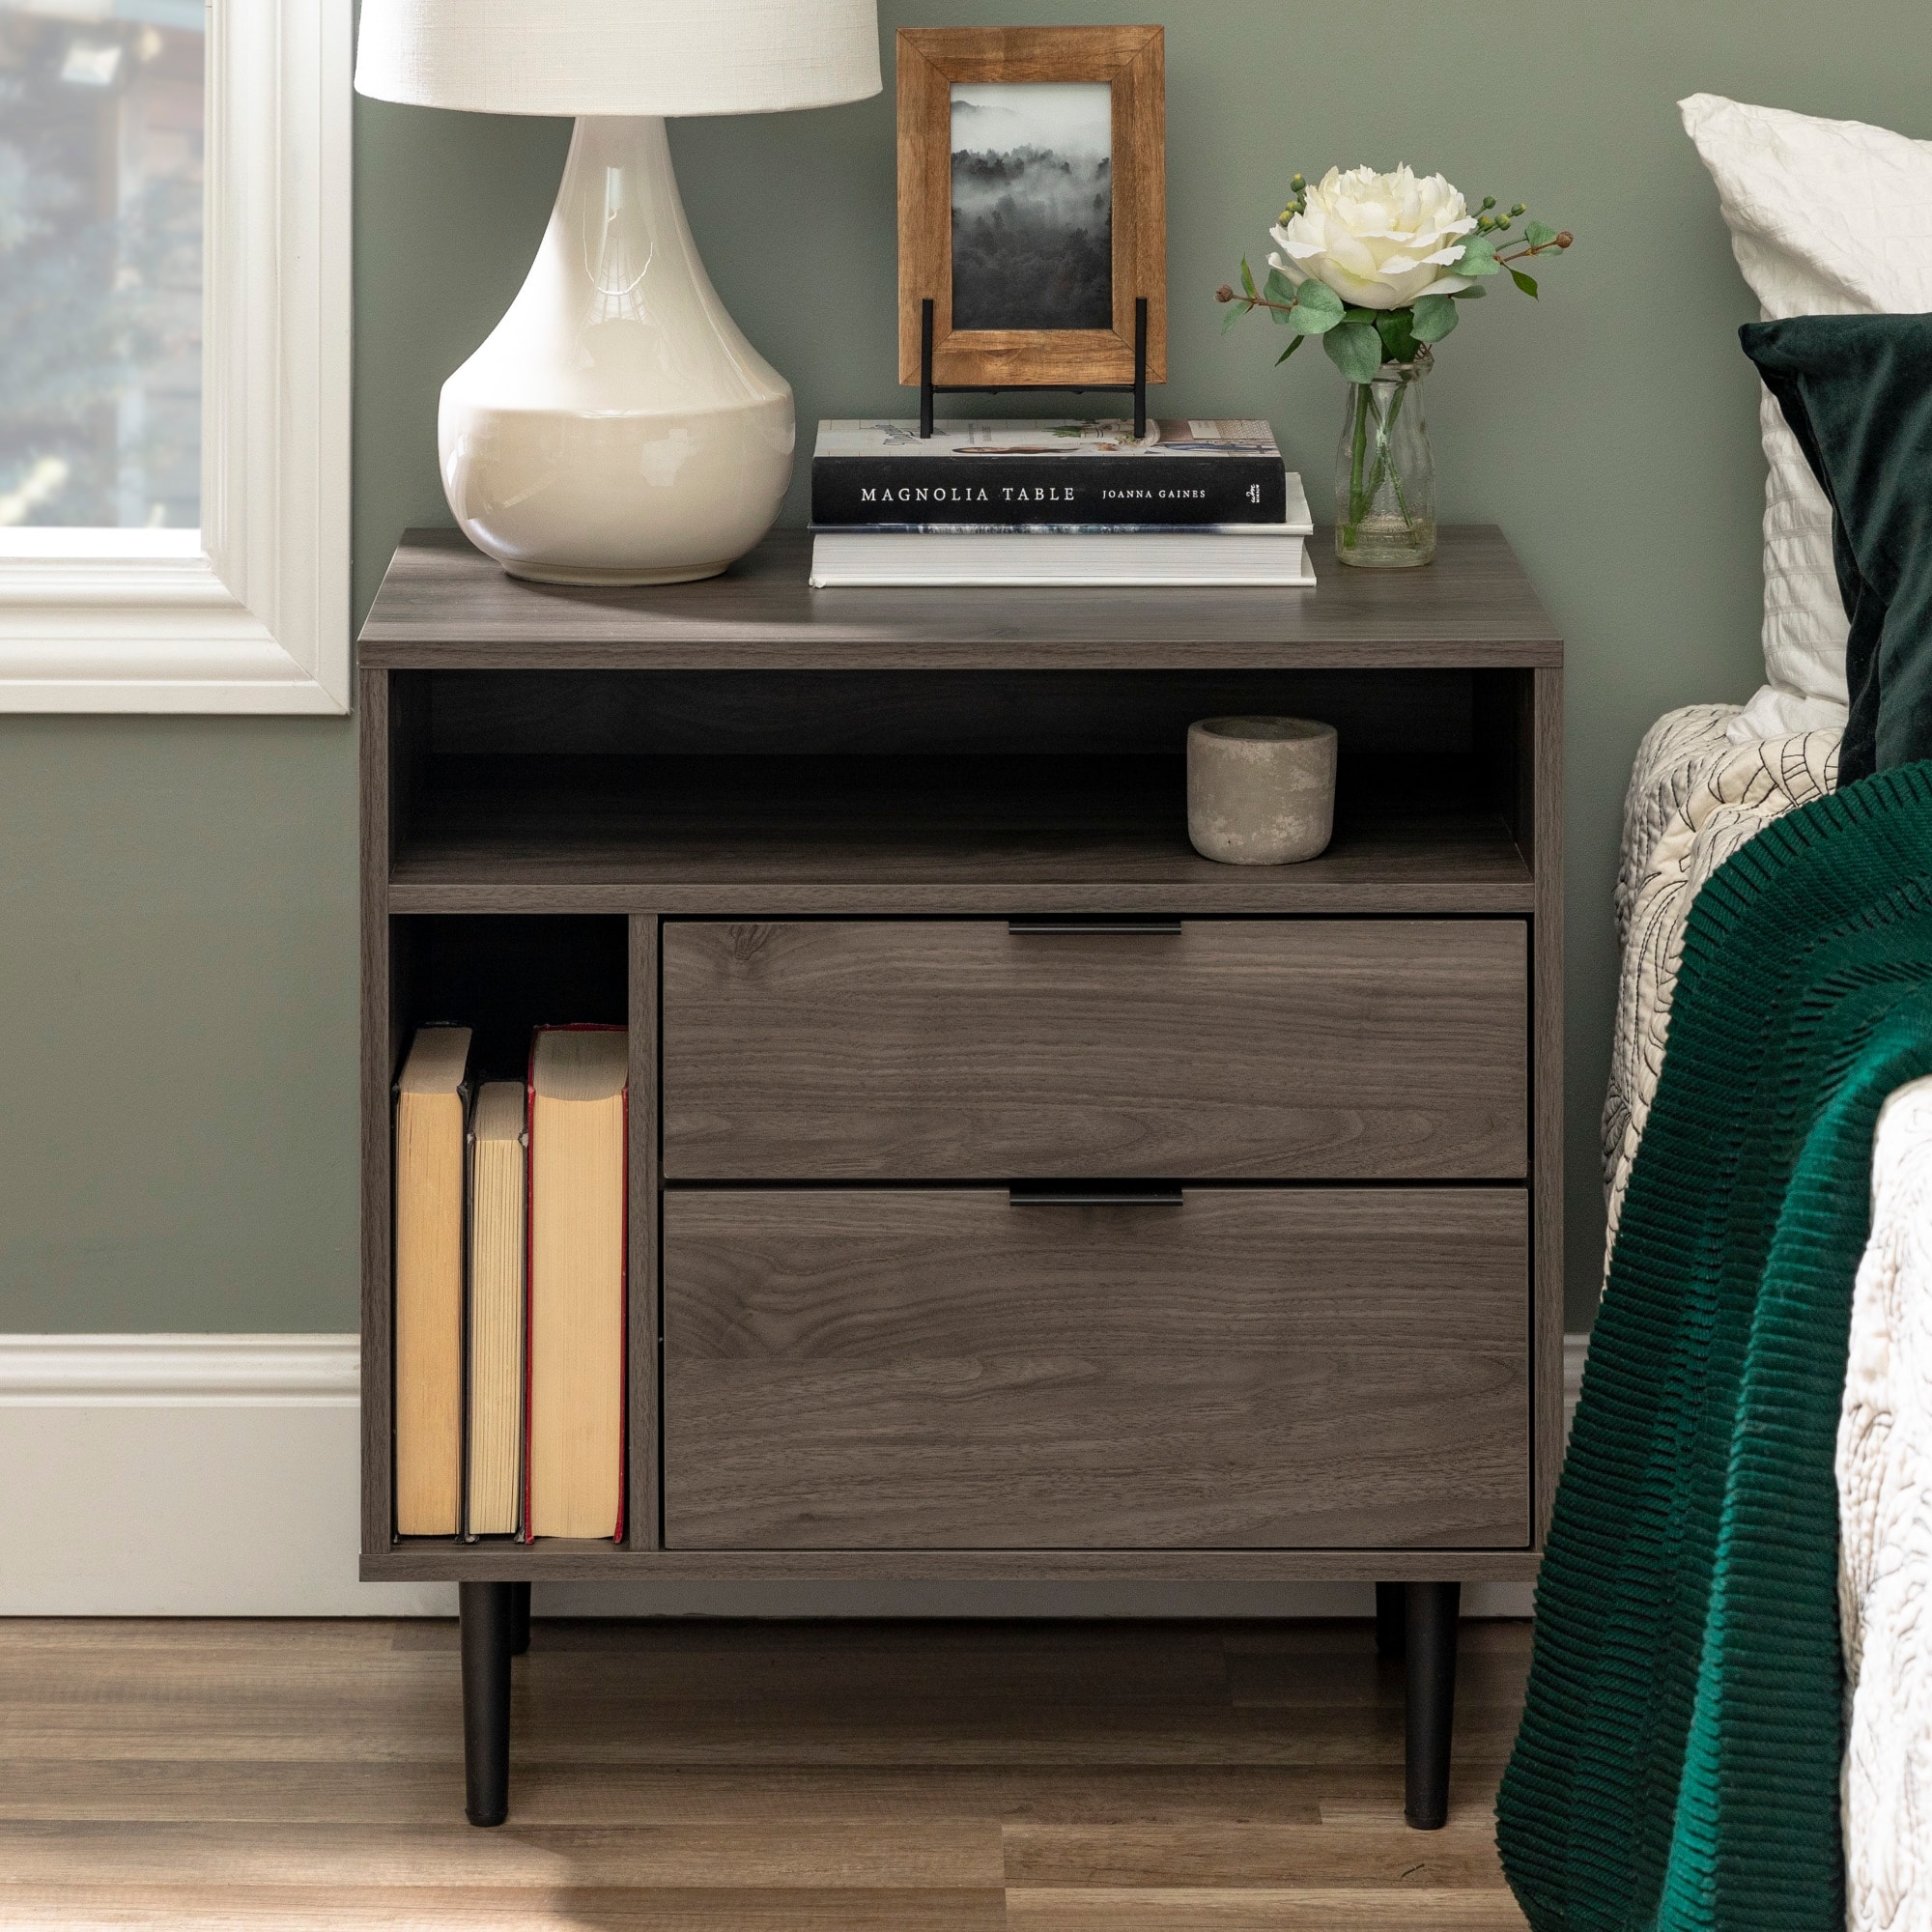 https://ak1.ostkcdn.com/images/products/is/images/direct/37a45d346af79c36935efc4e237aead0aff15548/Carson-Carrington-25-inch-Modern-Storage-Nightstand.jpg